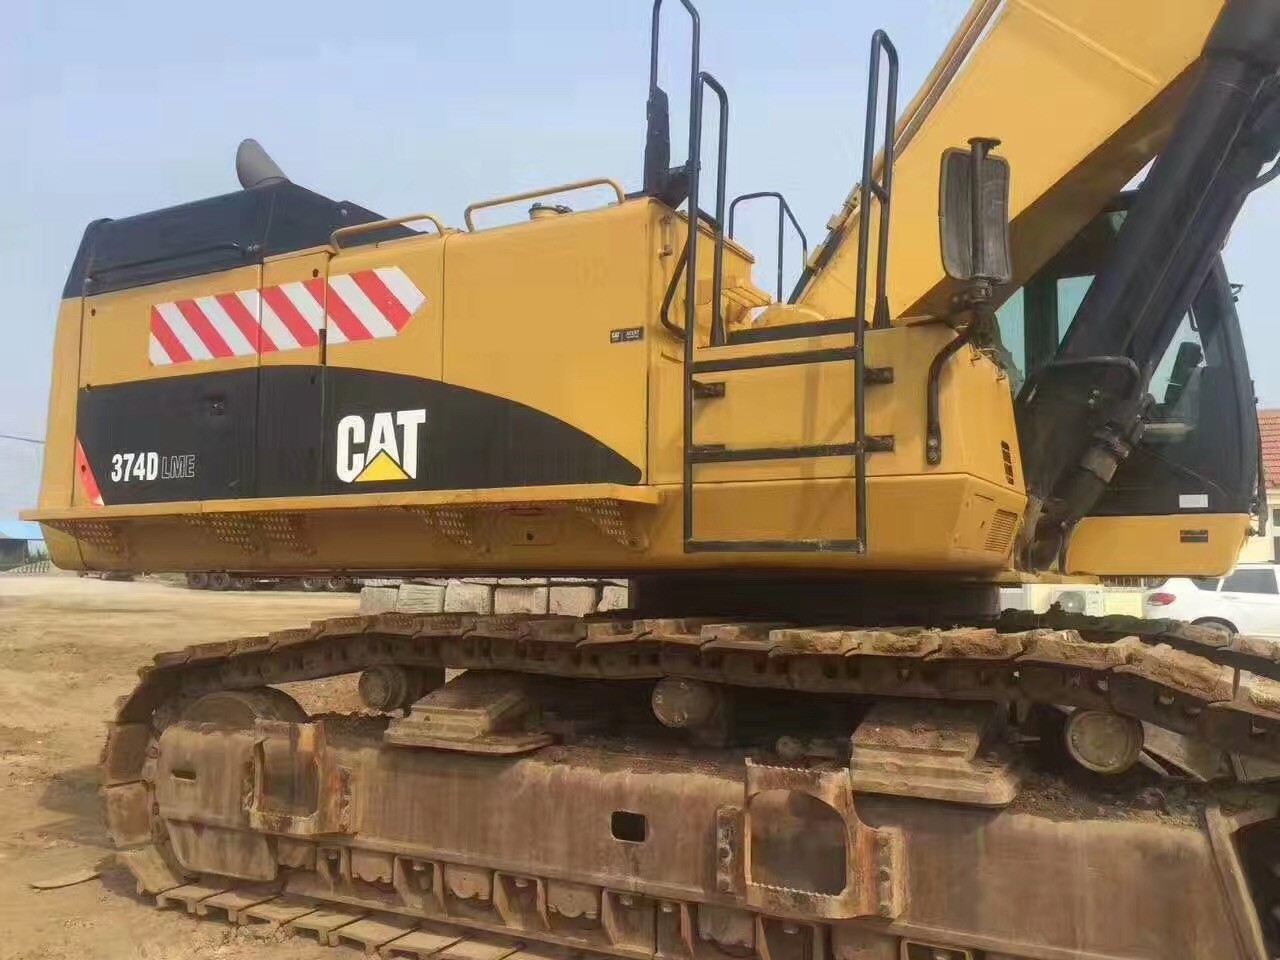   Caterpillar 374DL Second Hand Earthmoving Equipment 9321 Hours With CE Manufactures